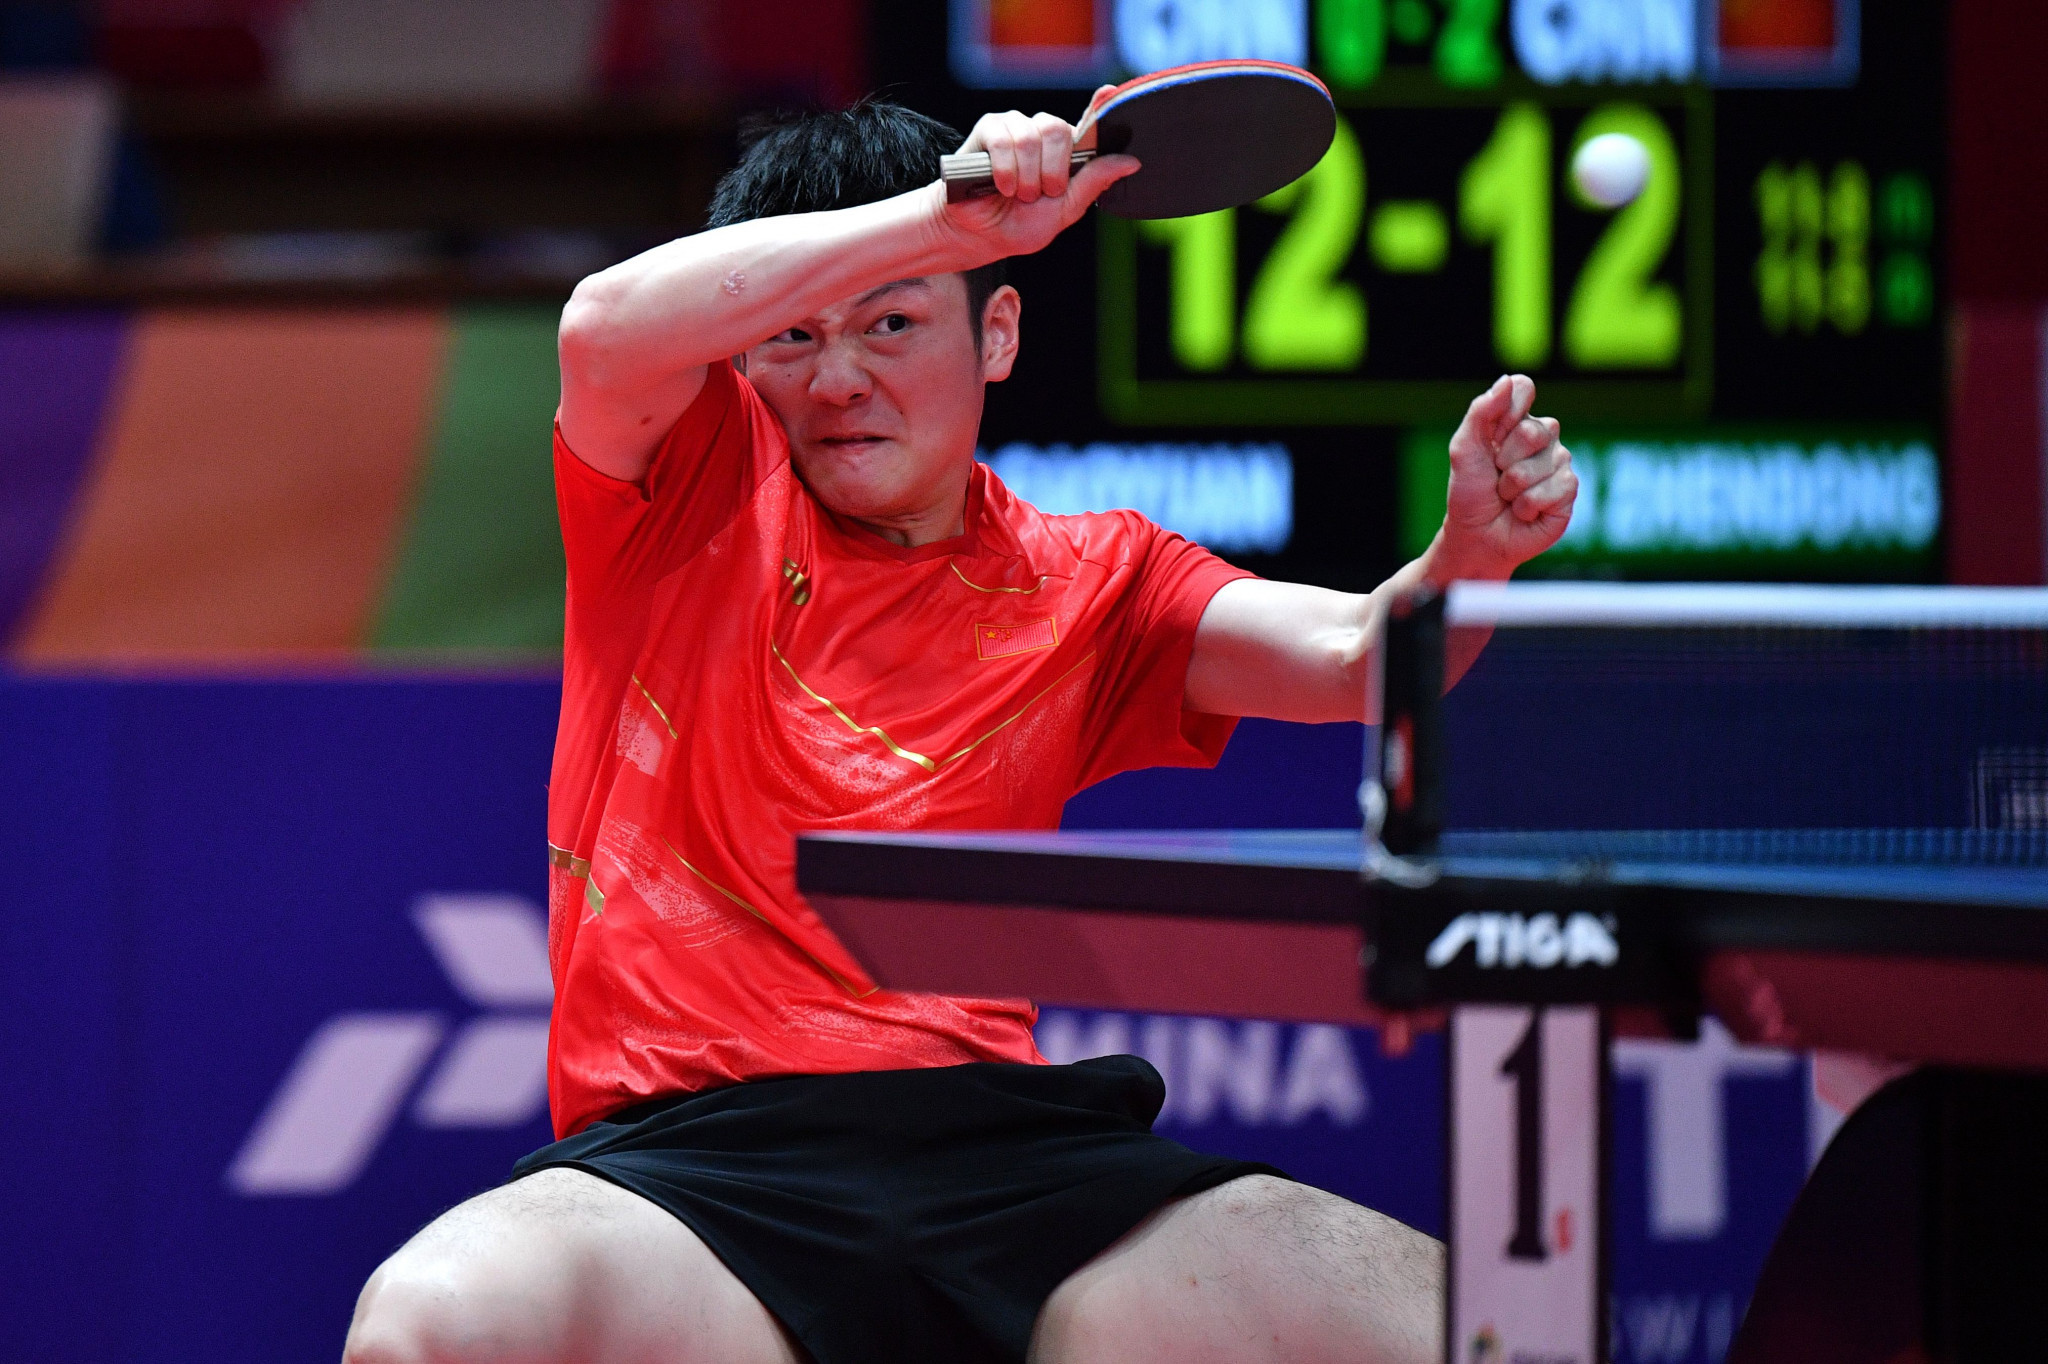 Fan Zhendong defeated compatriot Lin Gaoyuan in the men's singles table tennis final on a day when China sealed a clean sweep of the five gold medals on offer in the sport ©Getty Images